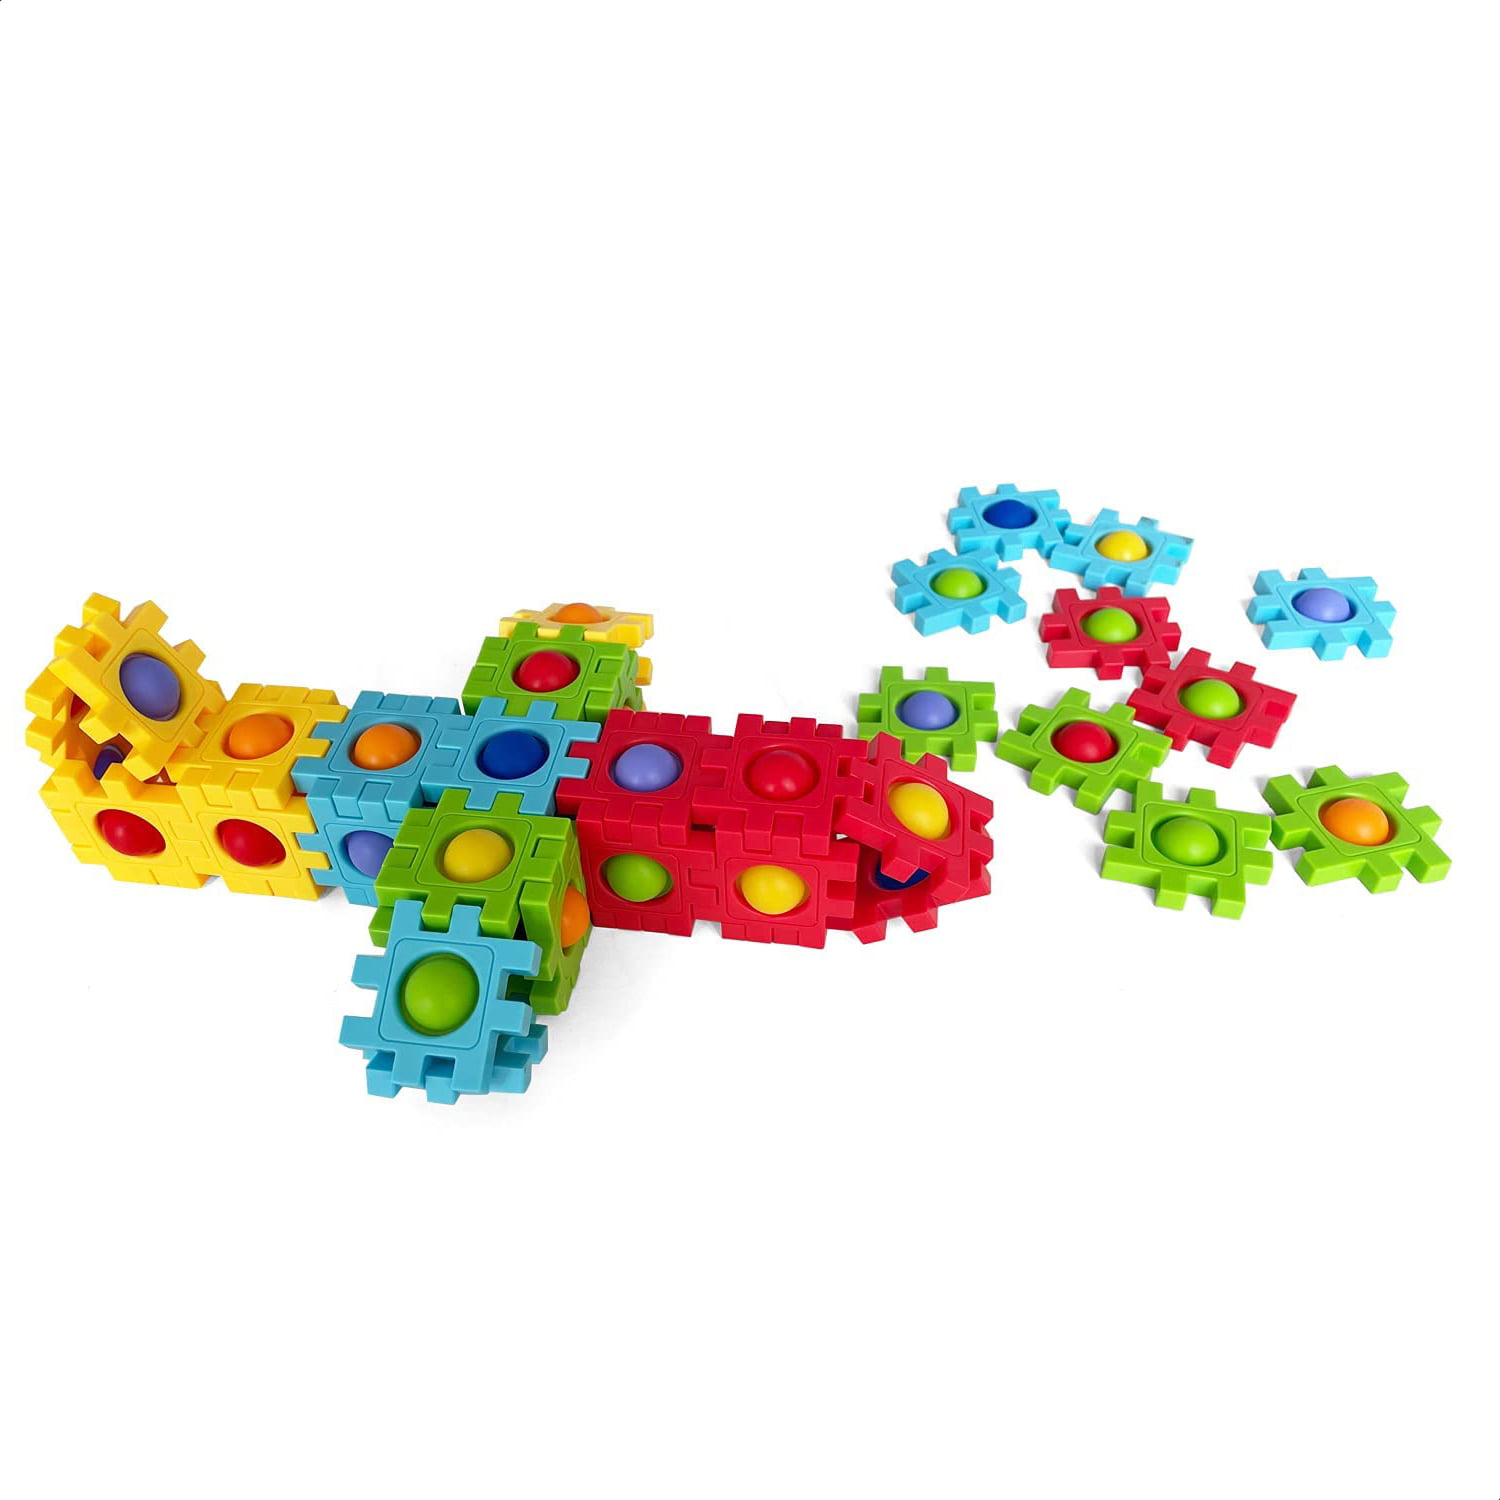 Anlabay Two-in-One Pop Blocks Pop Puzzle 48PCS, Jigsaw Puzzles, STEM Toys  for 4 5 6 7 8 Year Old Kids, Bubble Popping Sensory Toy, Autism Sensory  Toys